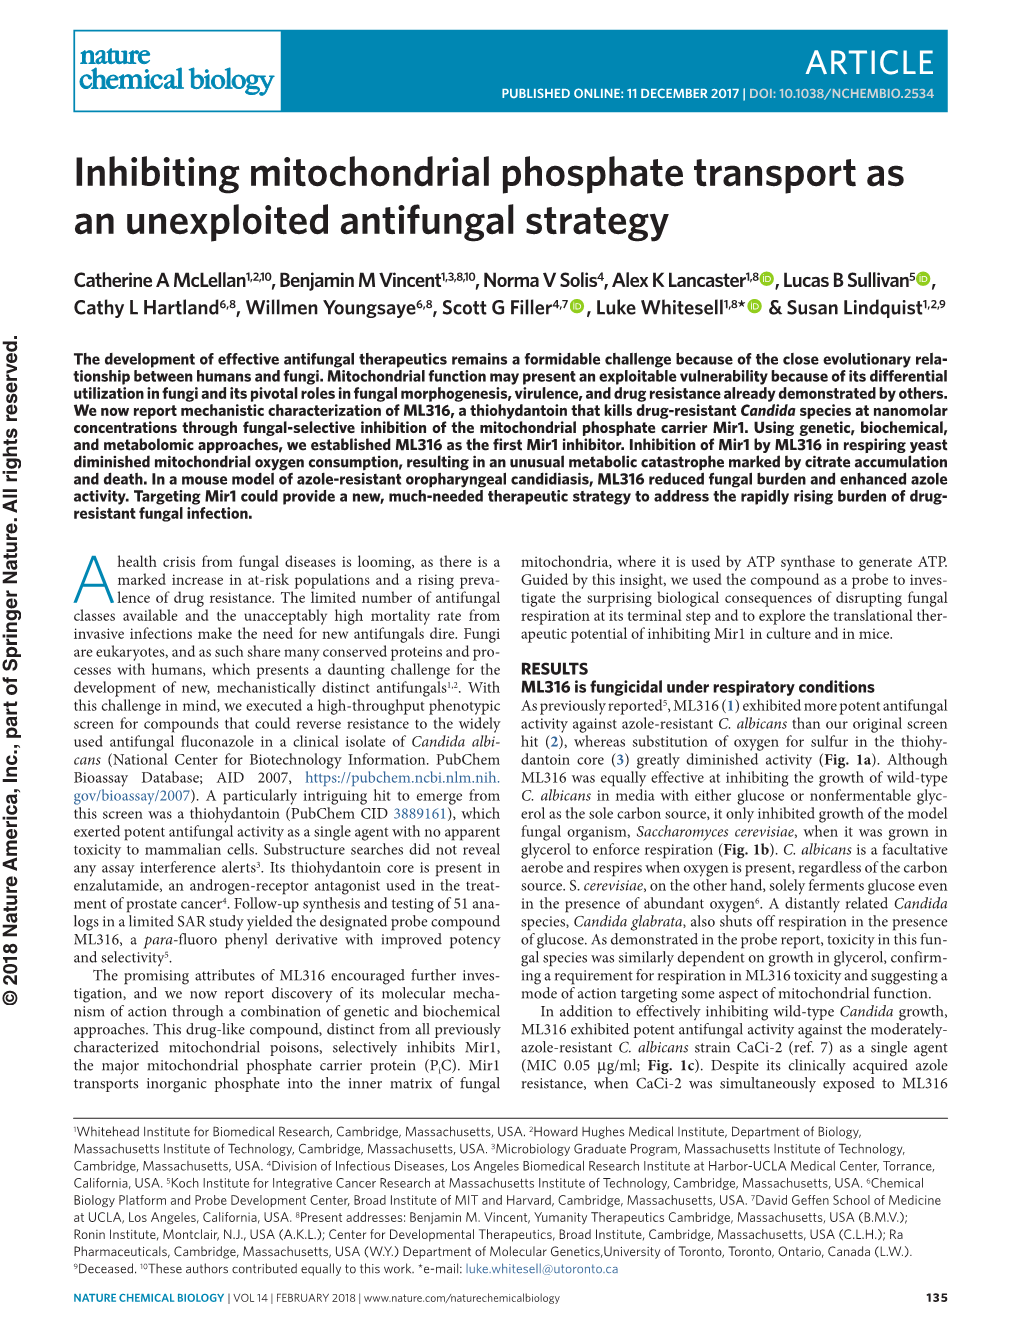 Inhibiting Mitochondrial Phosphate Transport As an Unexploited Antifungal Strategy